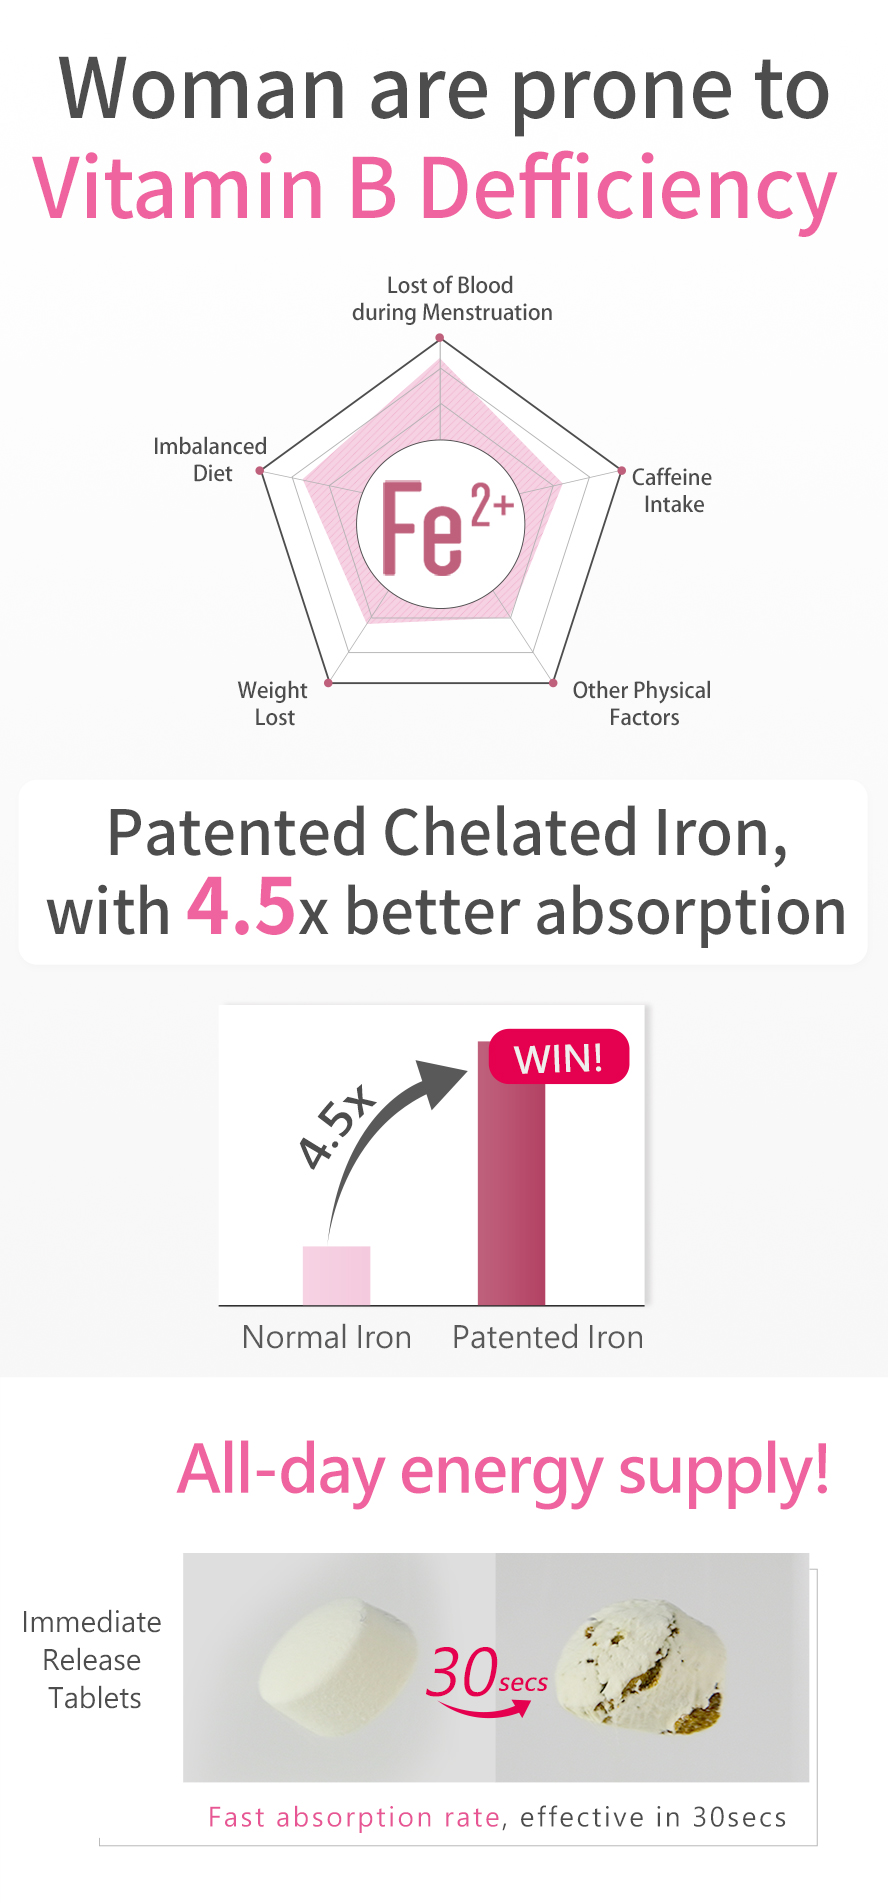 With iron that is 4.5 times more effective than normal iron, suitable for women 